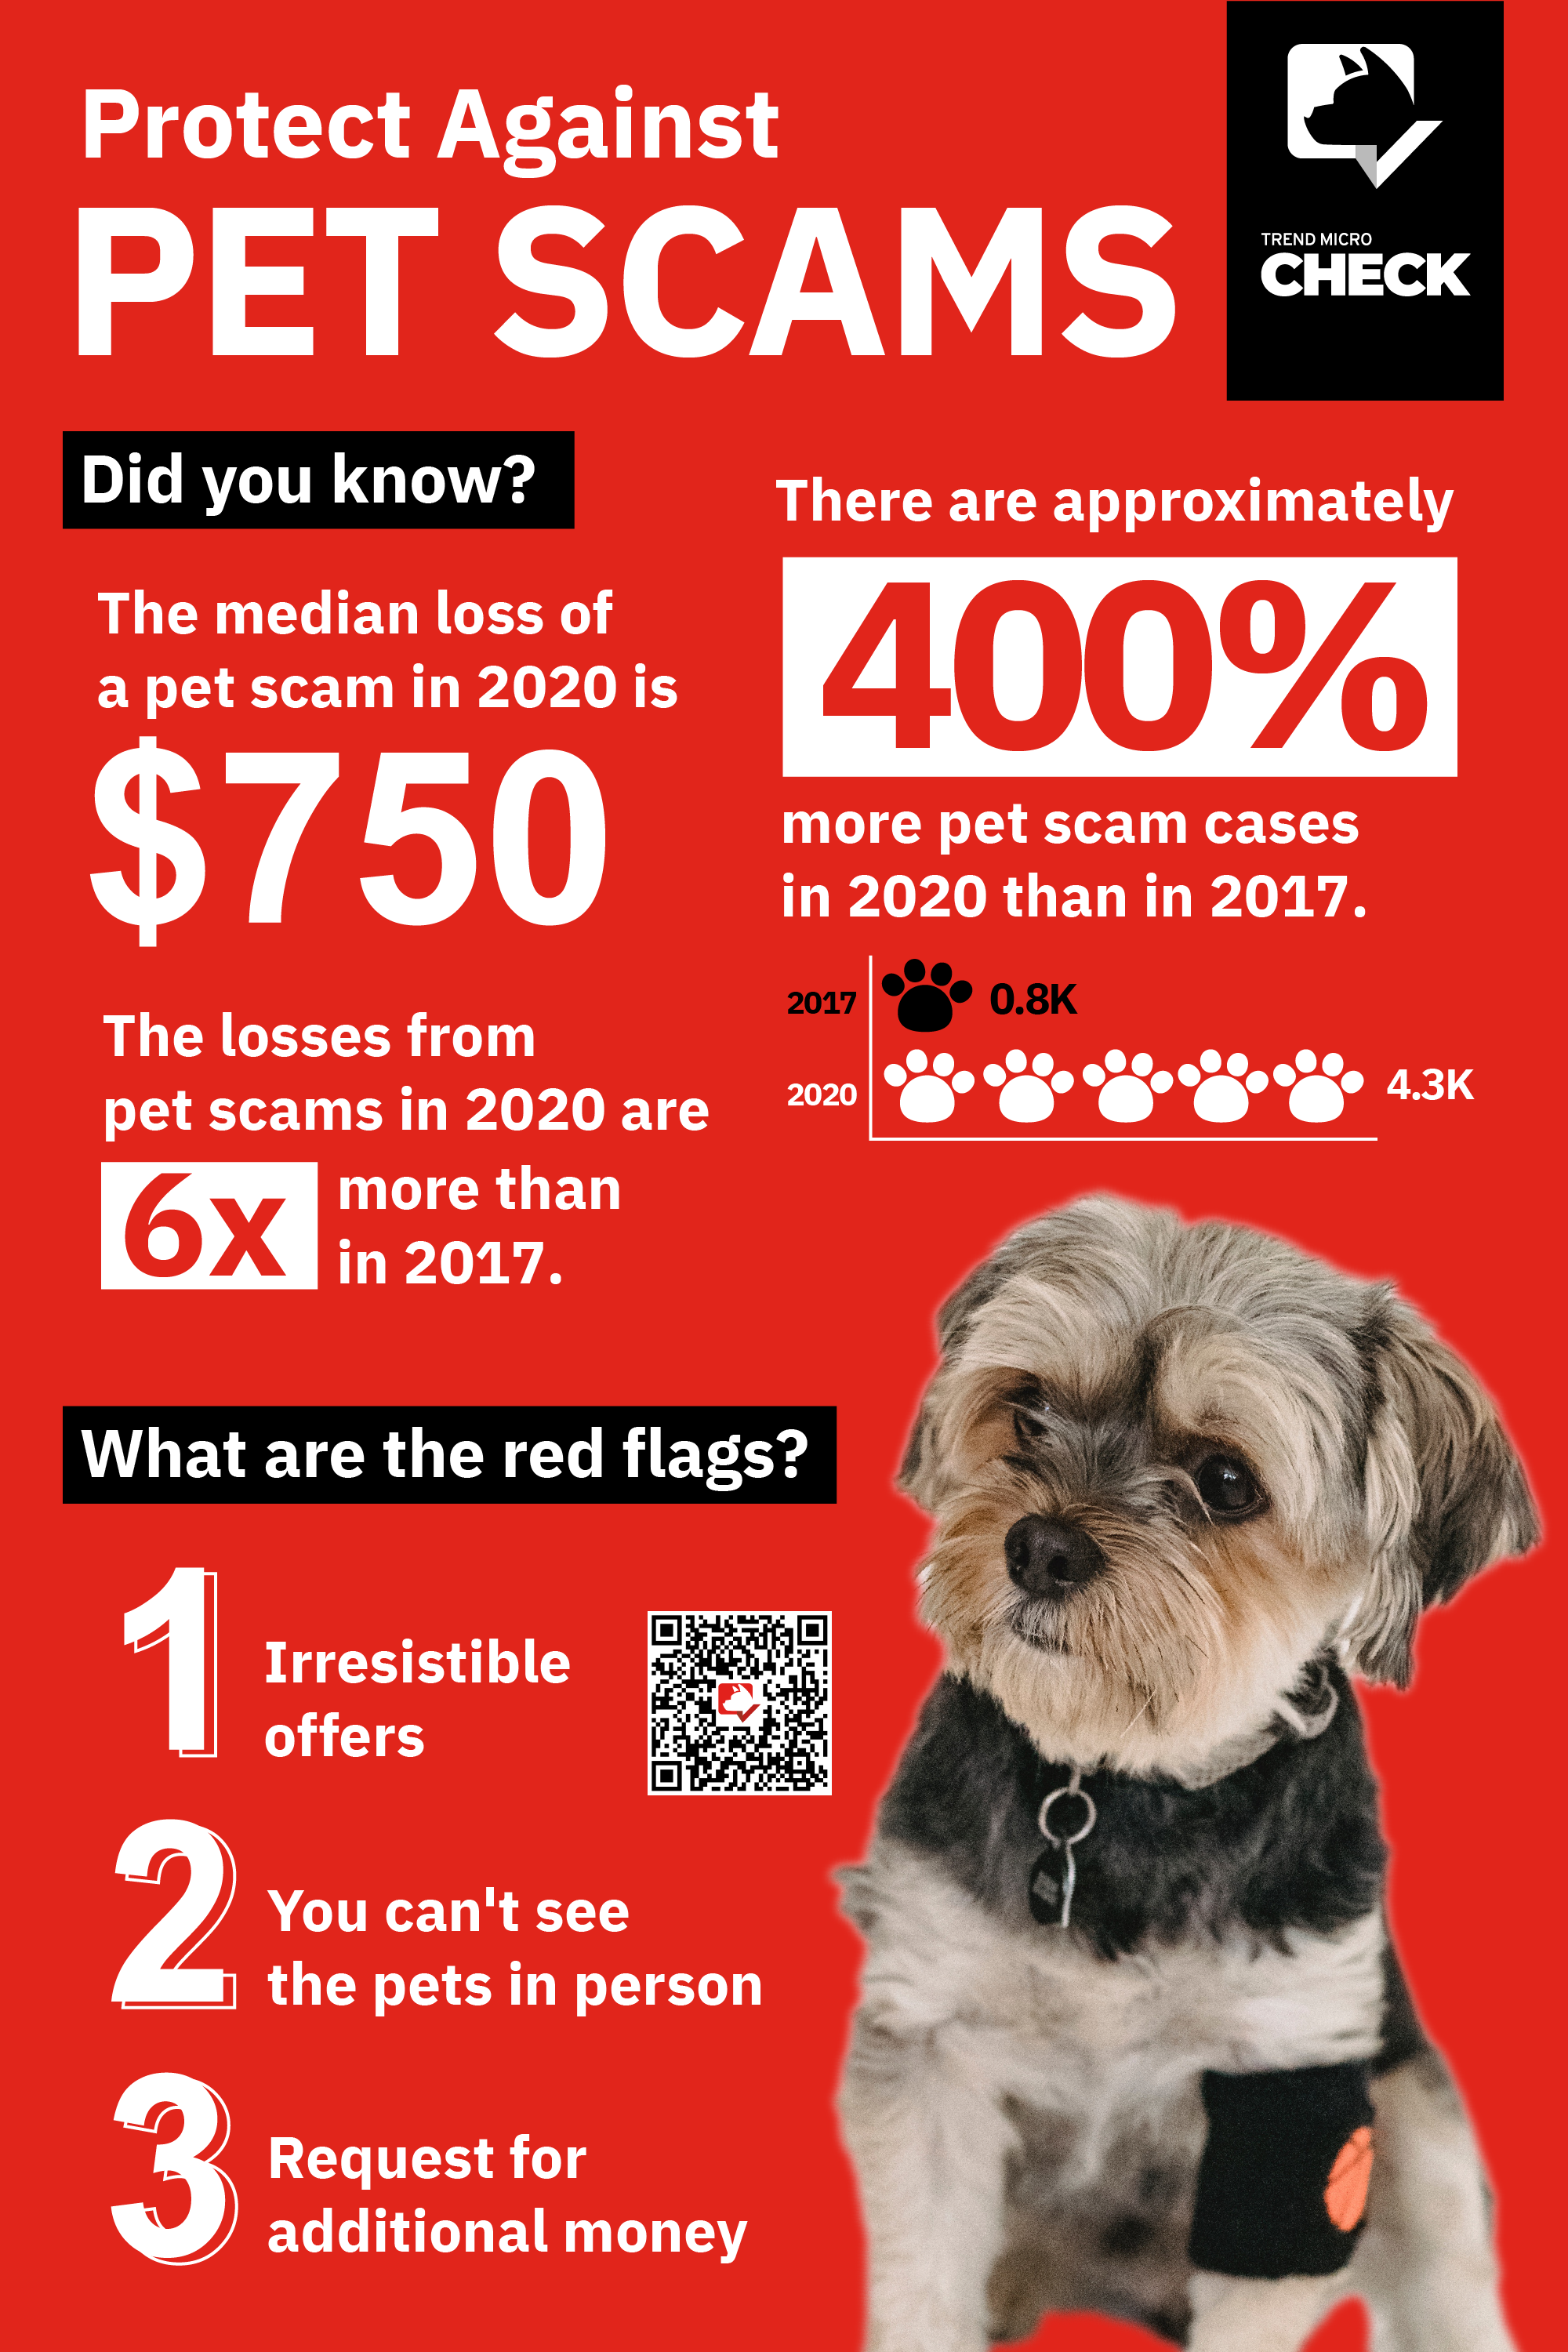 Be cautious of pet scams!